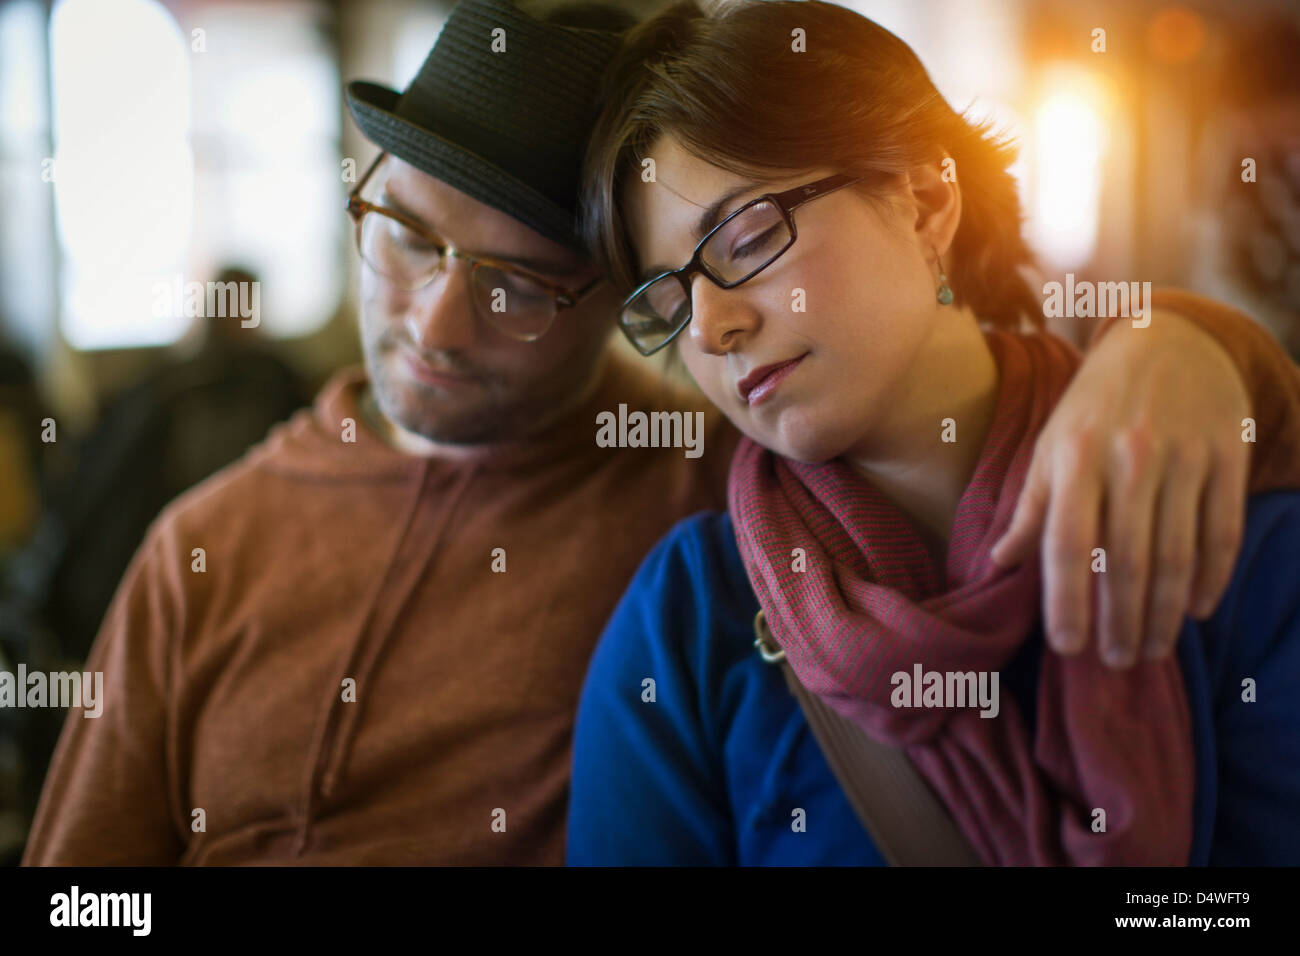 Couple napping on bench together Stock Photo